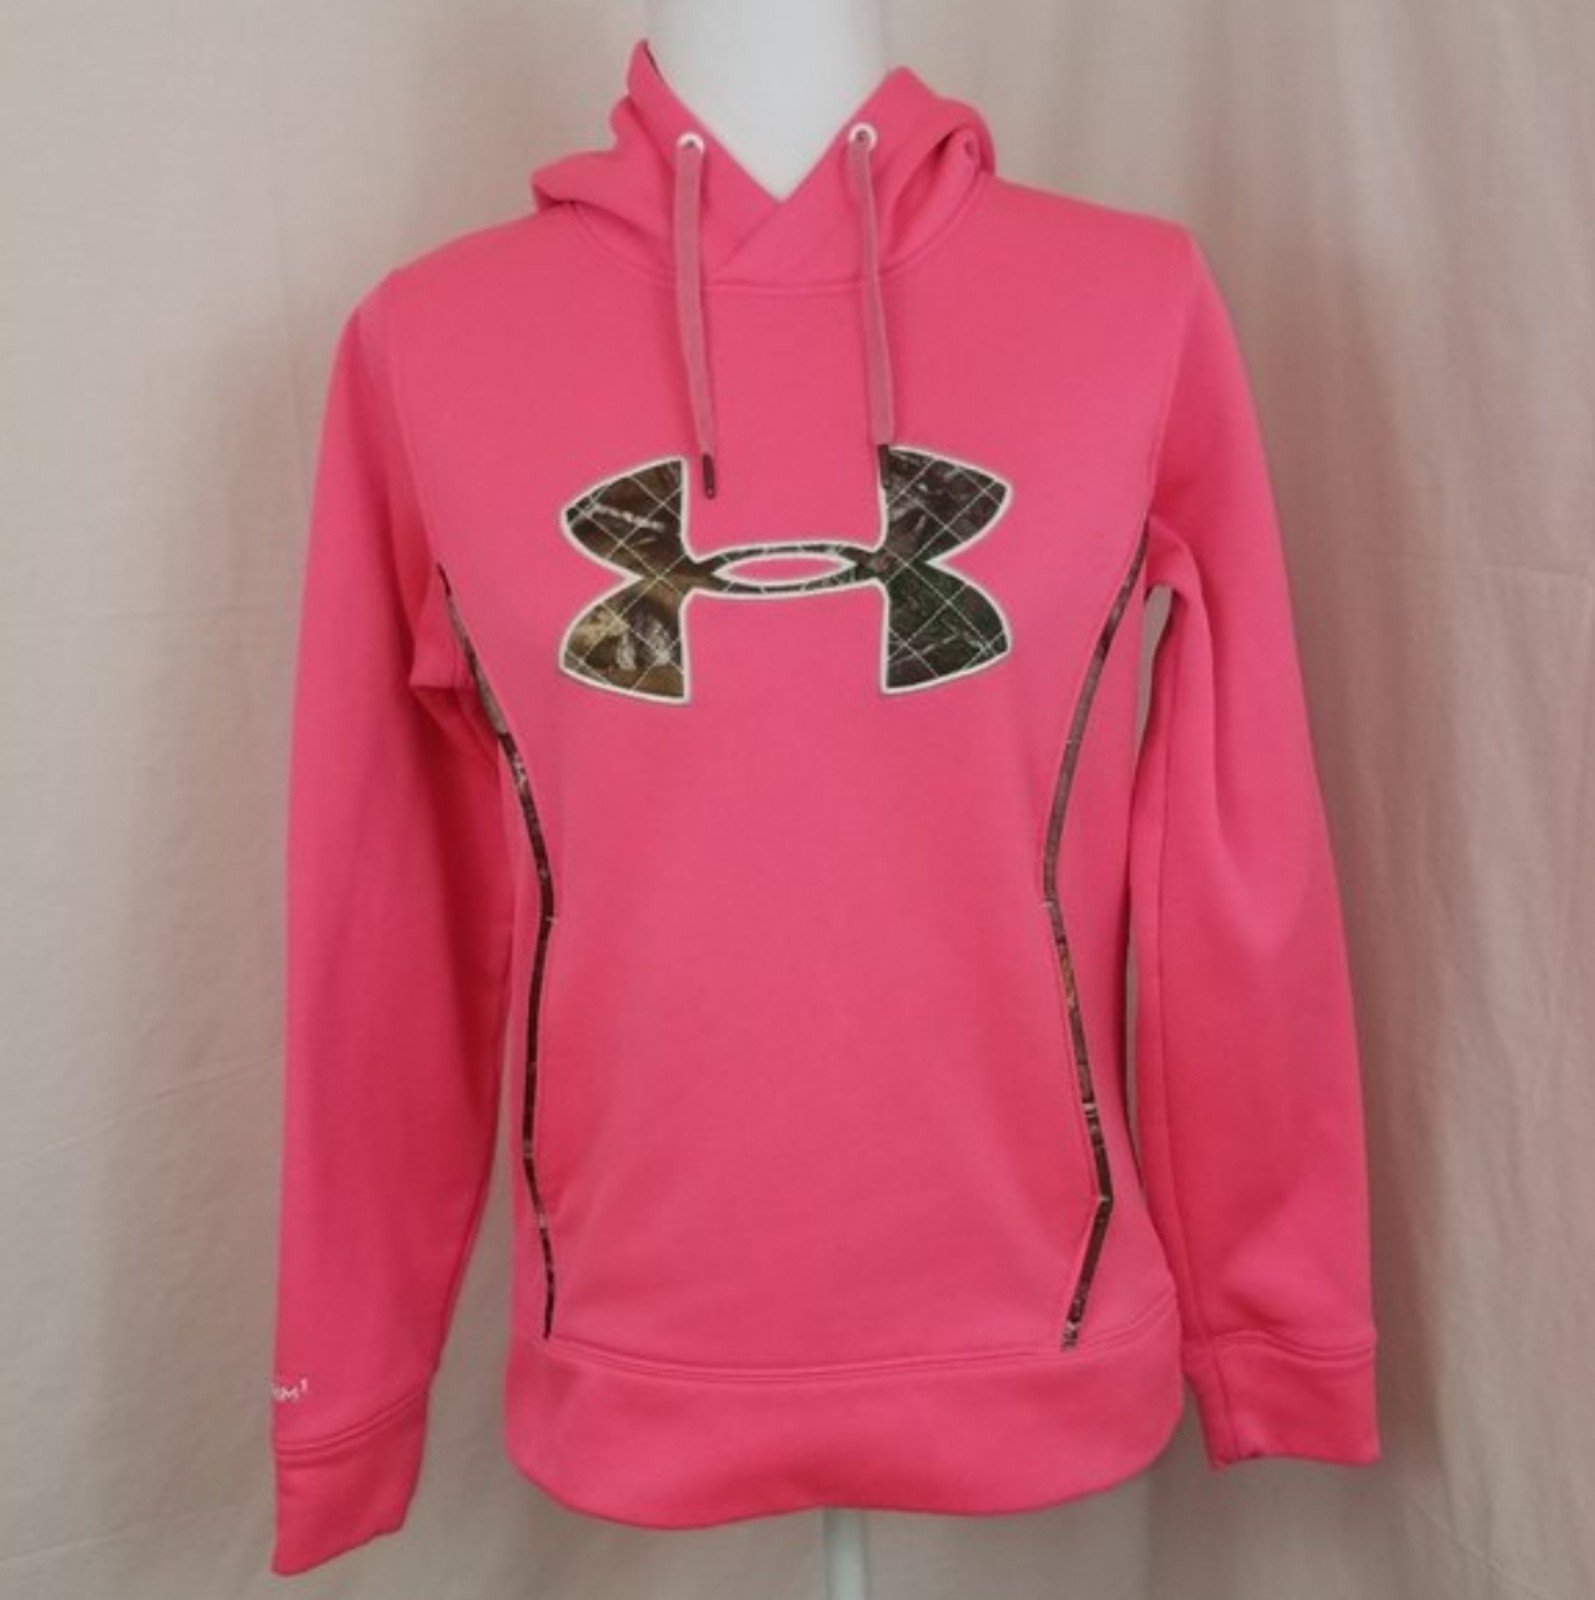 Great Under Armour Hoodie Breast Cancer FNiVy3sQr New S